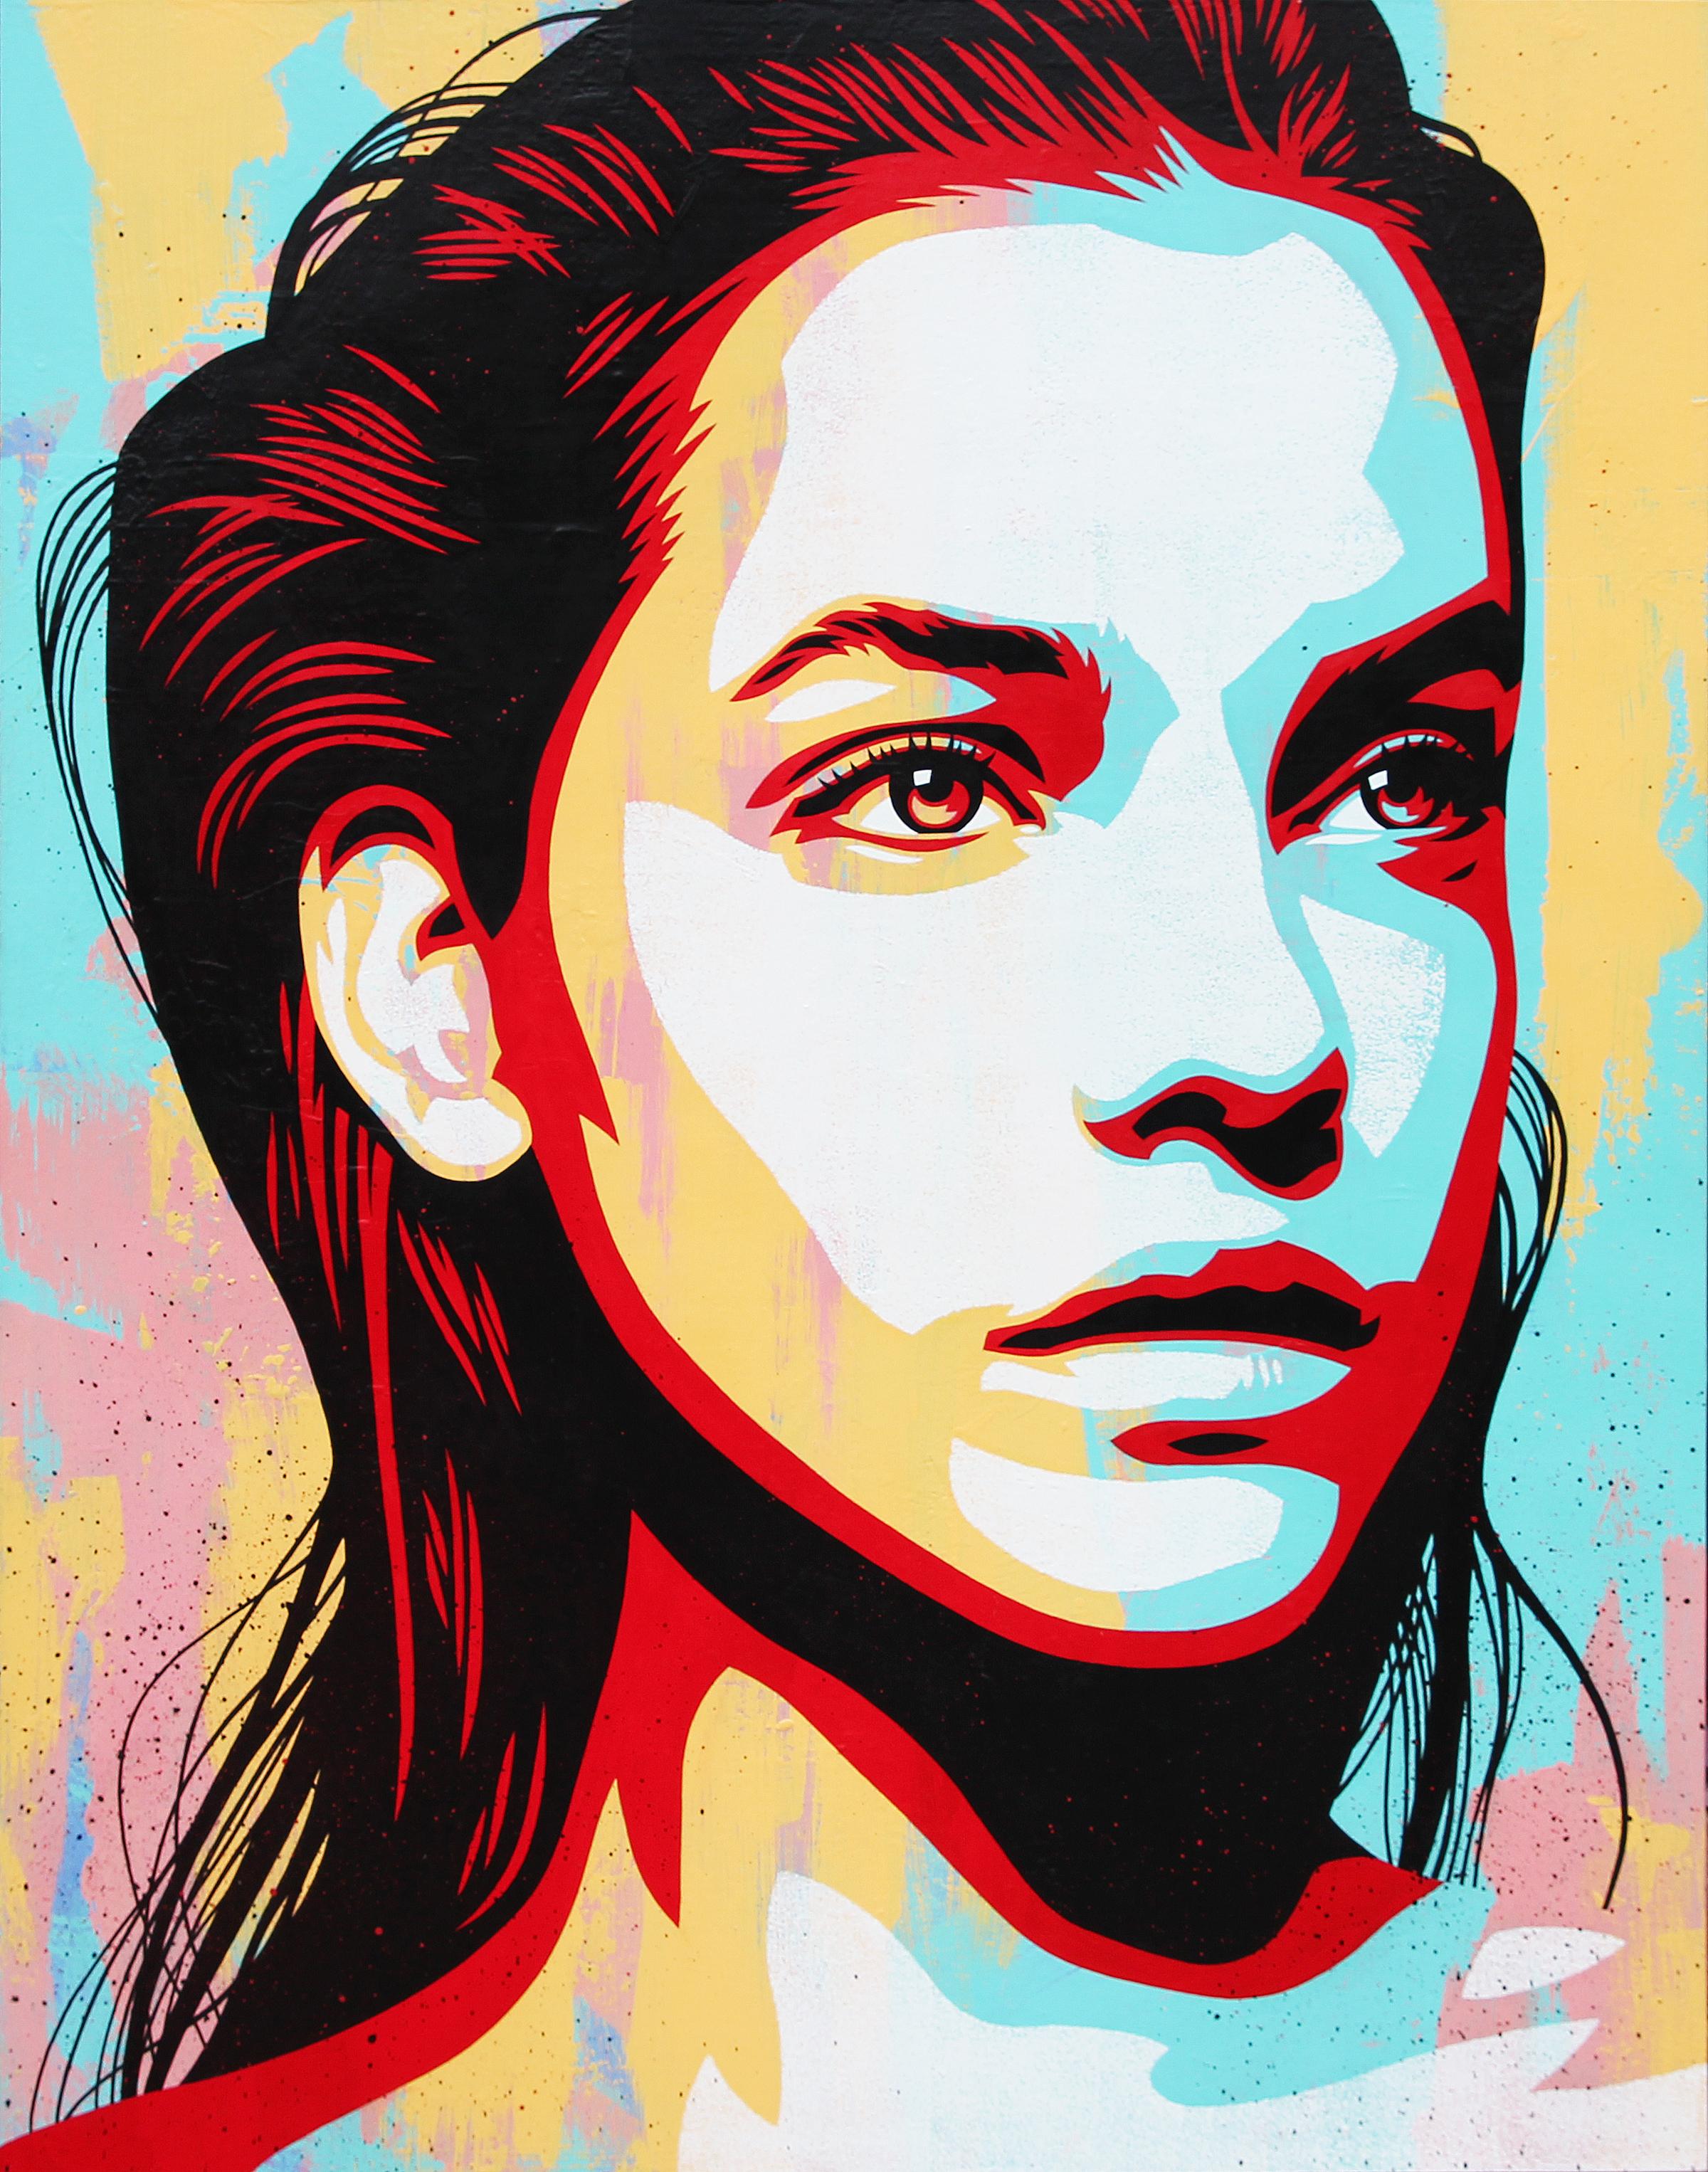 Ed Booth  Figurative Painting - “Eclipse” Contemporary Blue, Orange, Red, & Pink Vectorized Female Portrait 